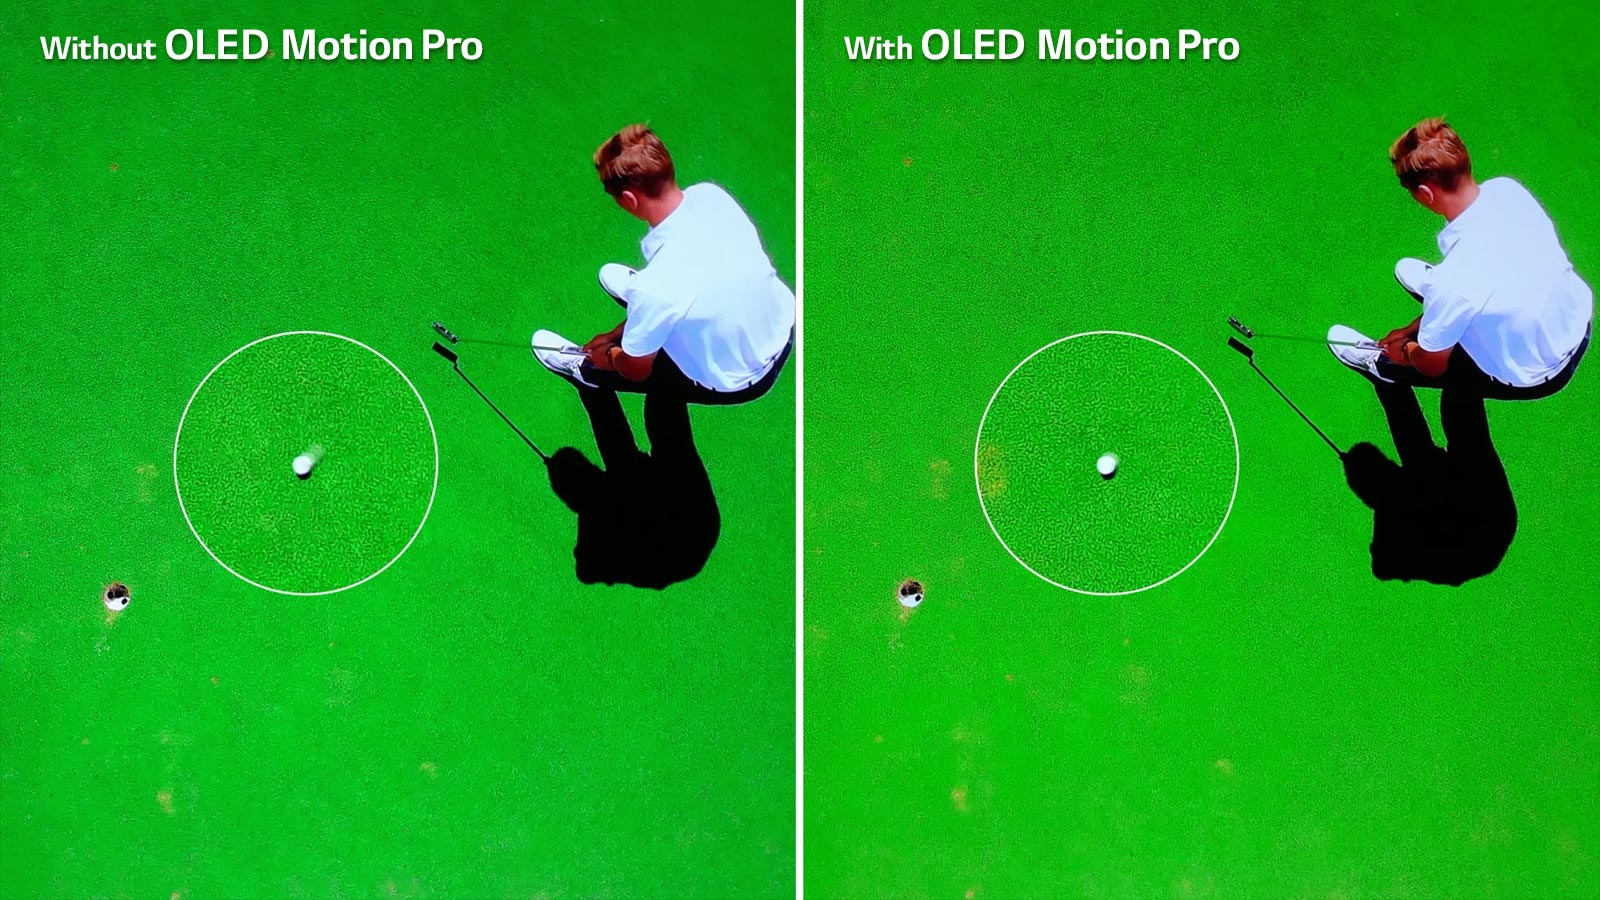 An image of a golf player hitting a golf ball to the hole and a close up of a blurry golf ball is located left with the text of ‘Without OLED Motion Pro’ on the upper left of the image. An image of a golf player hitting a golf ball to the hole and a close up of a clearer golf ball is located right with the text of ‘With OLED Motion Pro’ on the upper left of the image.